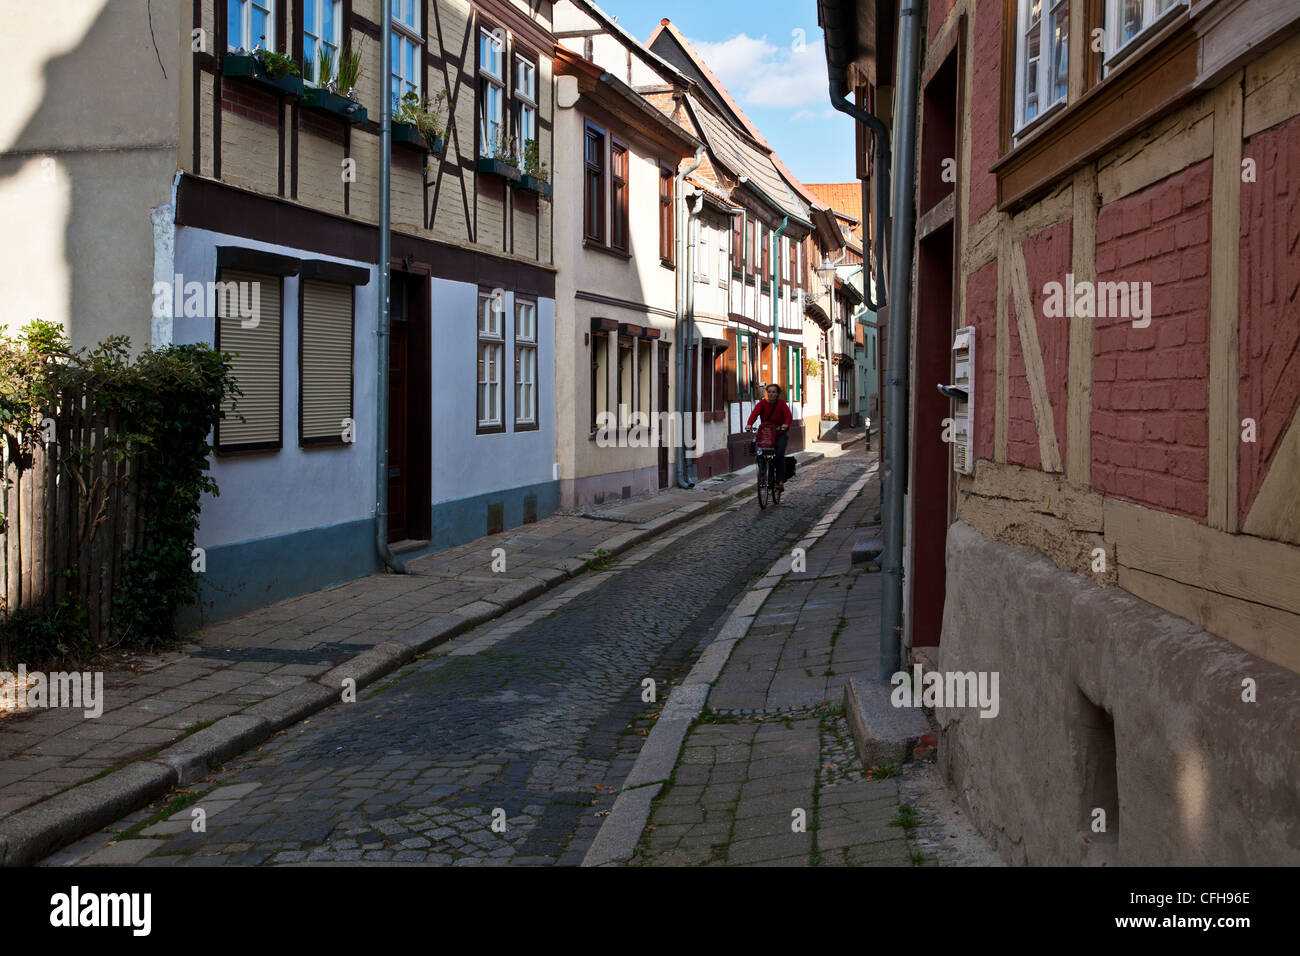 Woman cycling down a narrow cobbled street in the UNESCO German town of Quedlinburg, Saxony-Anhalt, Germany, EU Stock Photo